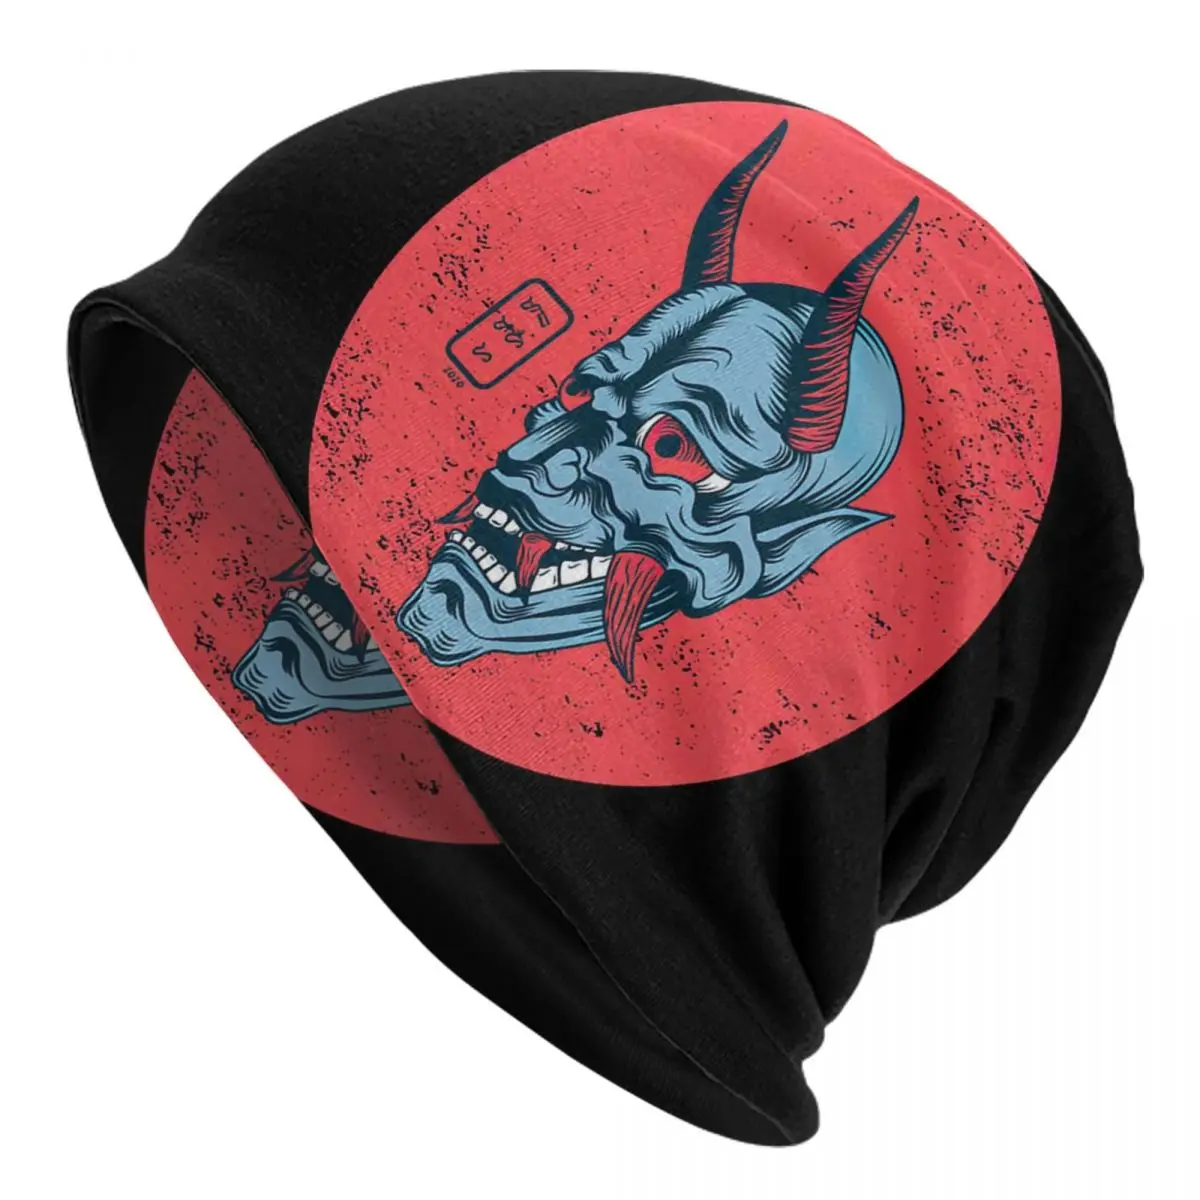 Floating Hannya Mask Adult Men's Women's Knit Hat Keep warm winter Funny knitted hat